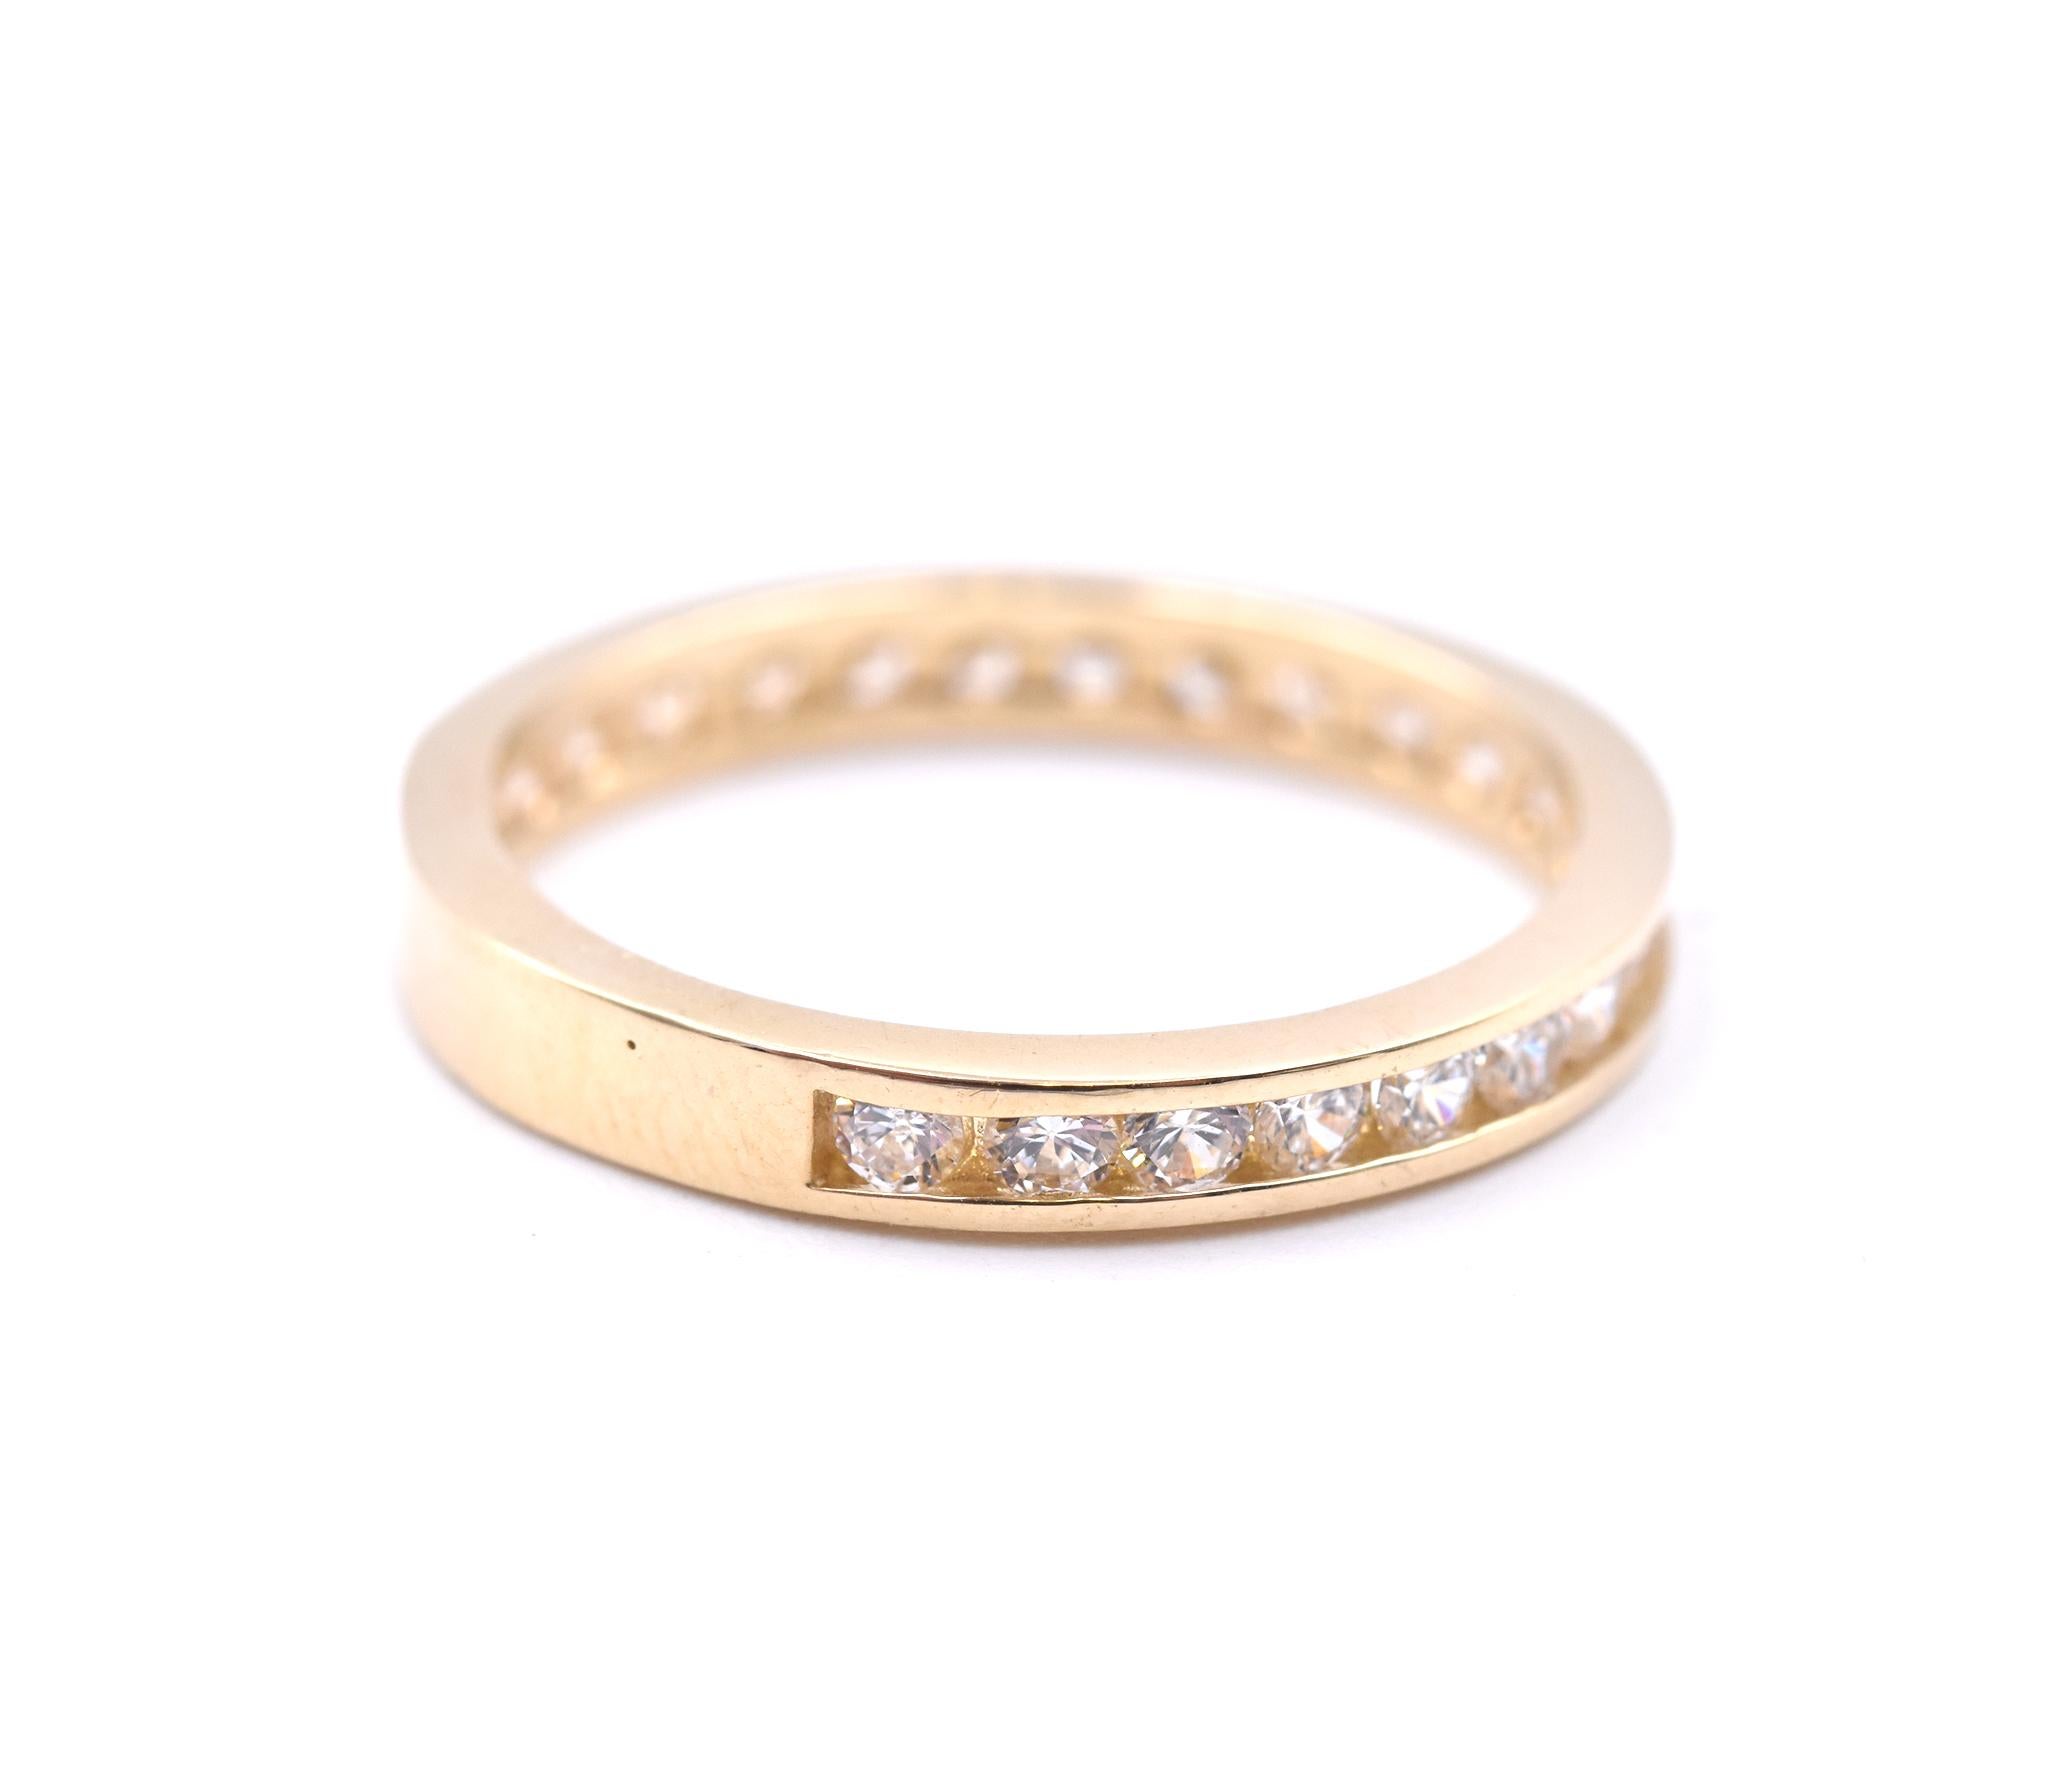 Designer: Custom
Material: 14k Yellow Gold 
Diamonds: 22 round cut = 0.90cttw 
Color: I
Clarity: SI1
Size: 7
Dimensions: ring measures 2.2mm in width
Weight: 2.43 grams